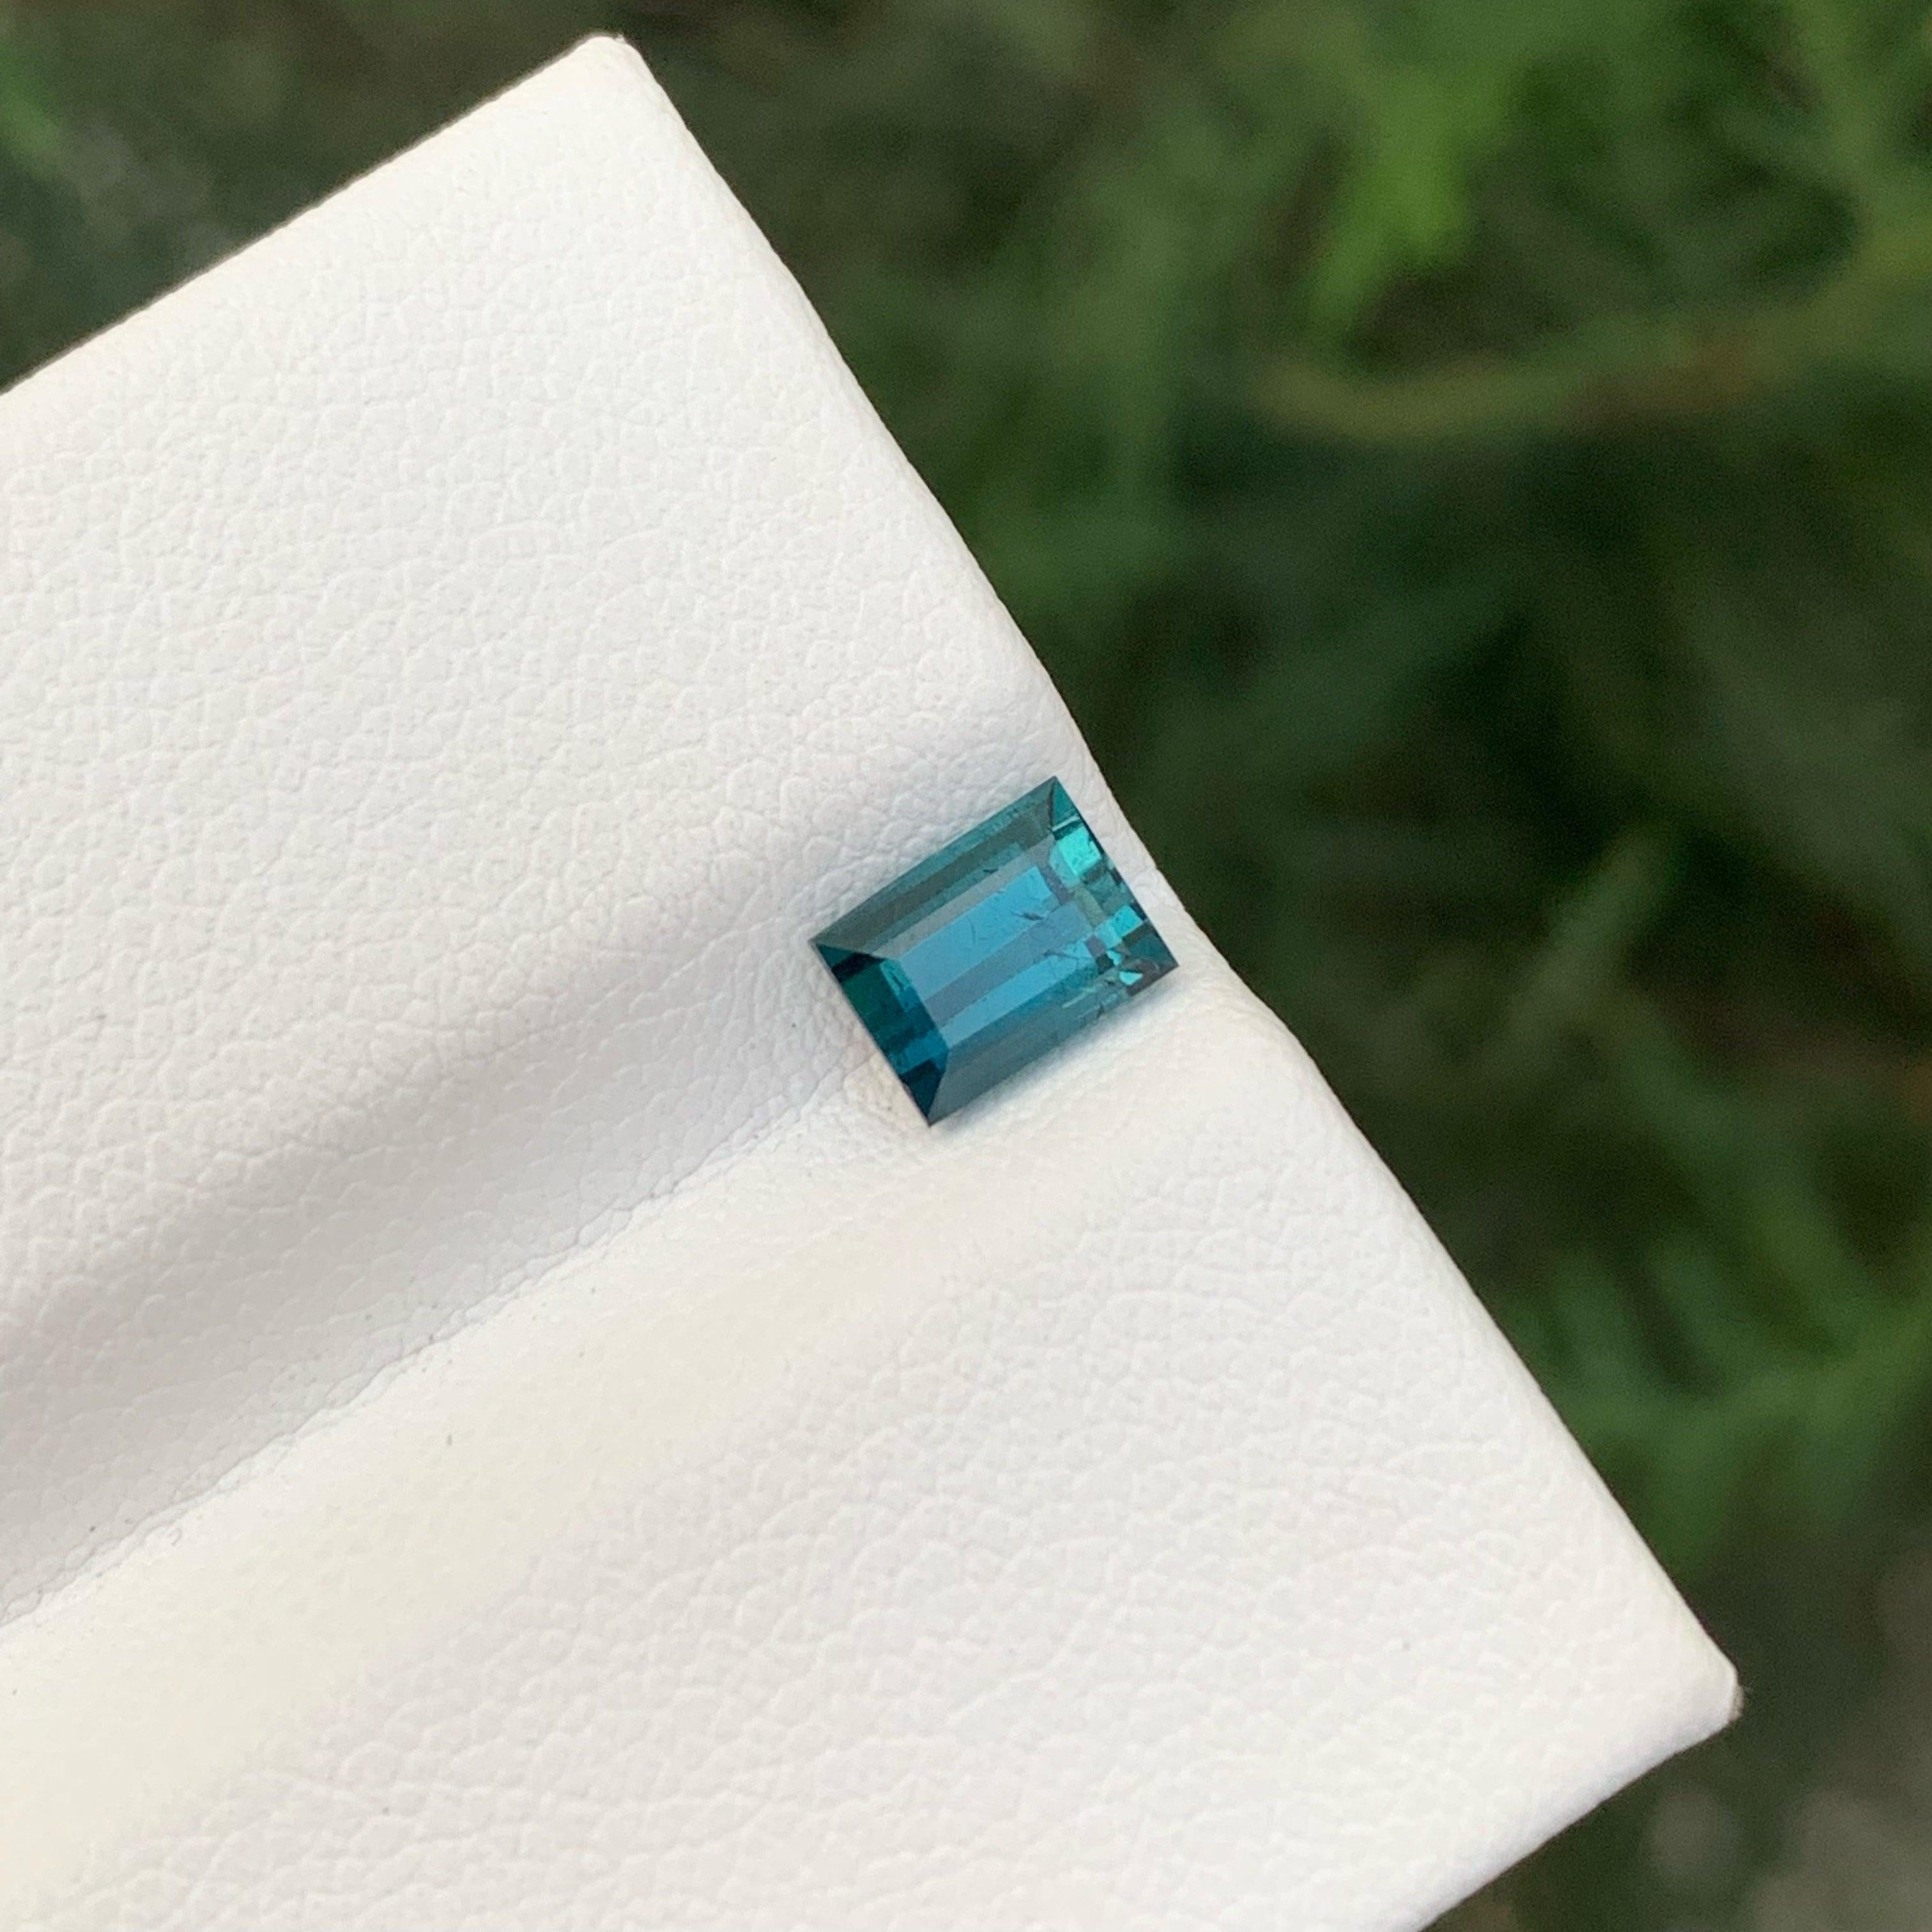 Exquisite Natural Indicolite Tourmaline Gemstone, Available For Sale At Wholesale Price Natural High Quality 0.95 Carats SI Clarity Natural Loose Tourmaline From Afghanistan.

Production Information:
GEMSTONE TYPE:	Exquisite Natural Indicolite